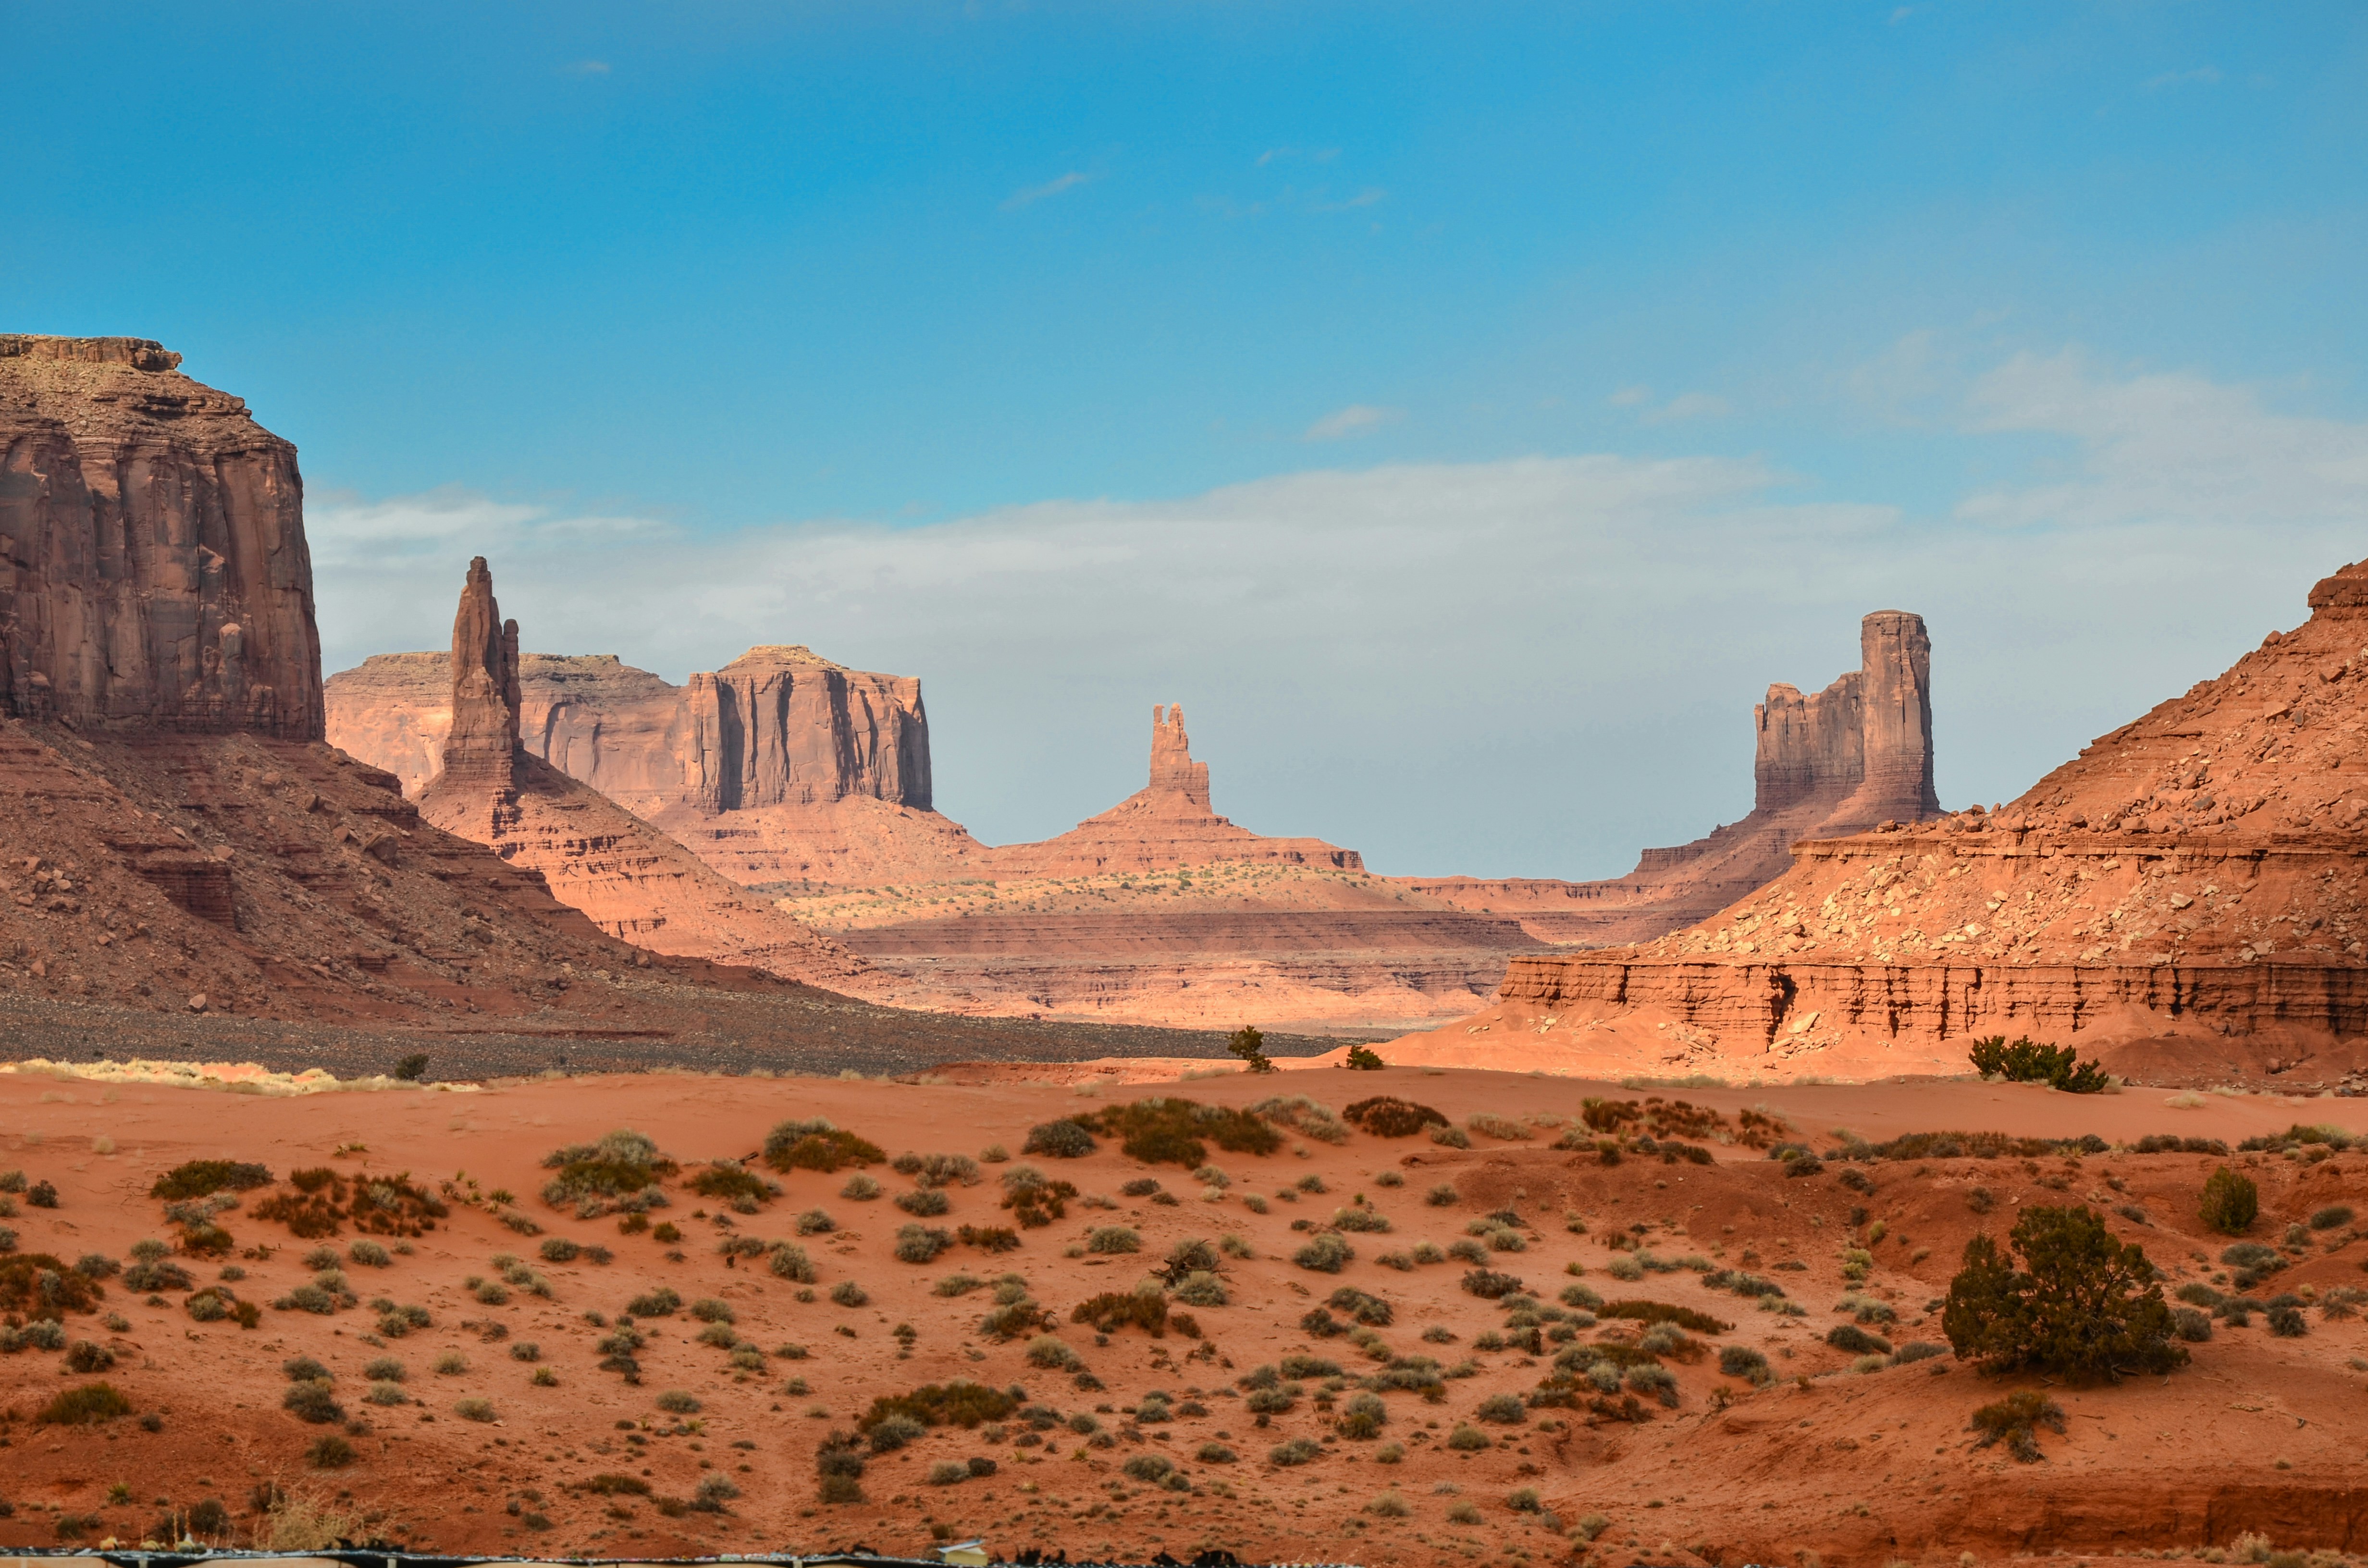 Walking down the Wildcat trail in Monument Valley opens up this magnificent view to everyone. Amazing weather and good light helped us with this picture.